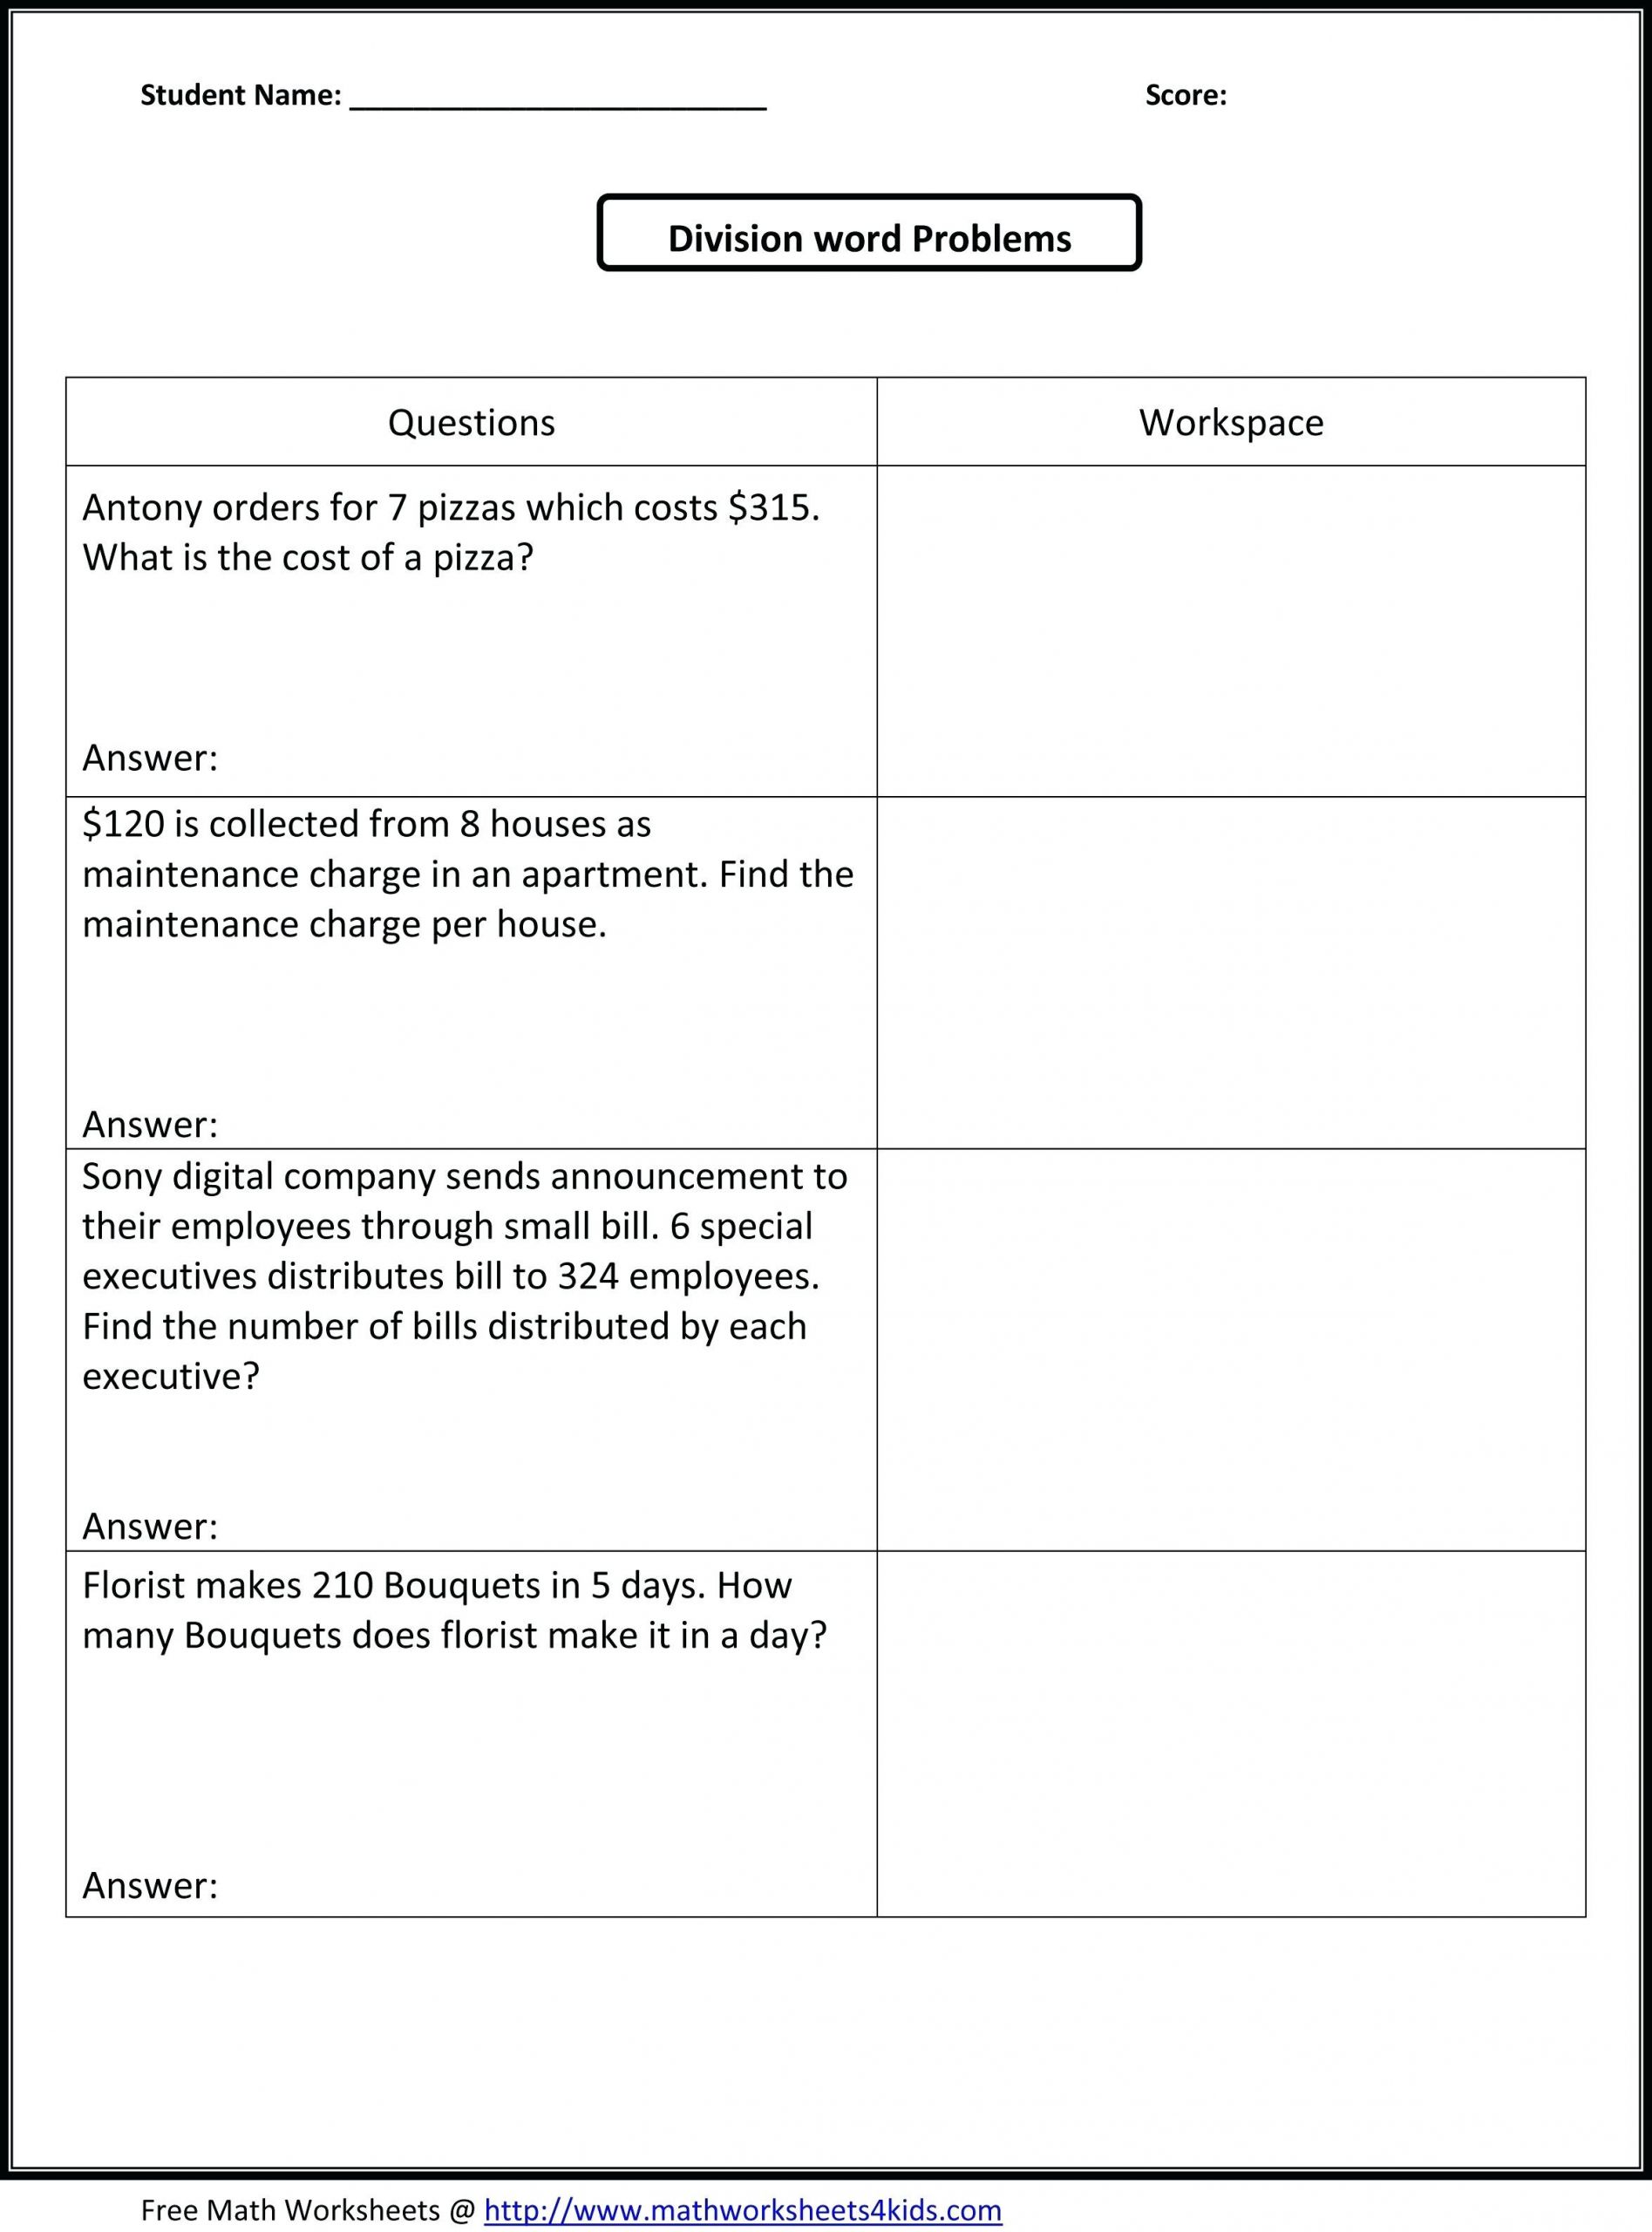 Free Math Worksheets First Grade 1 Subtraction Subtracting whole Tens